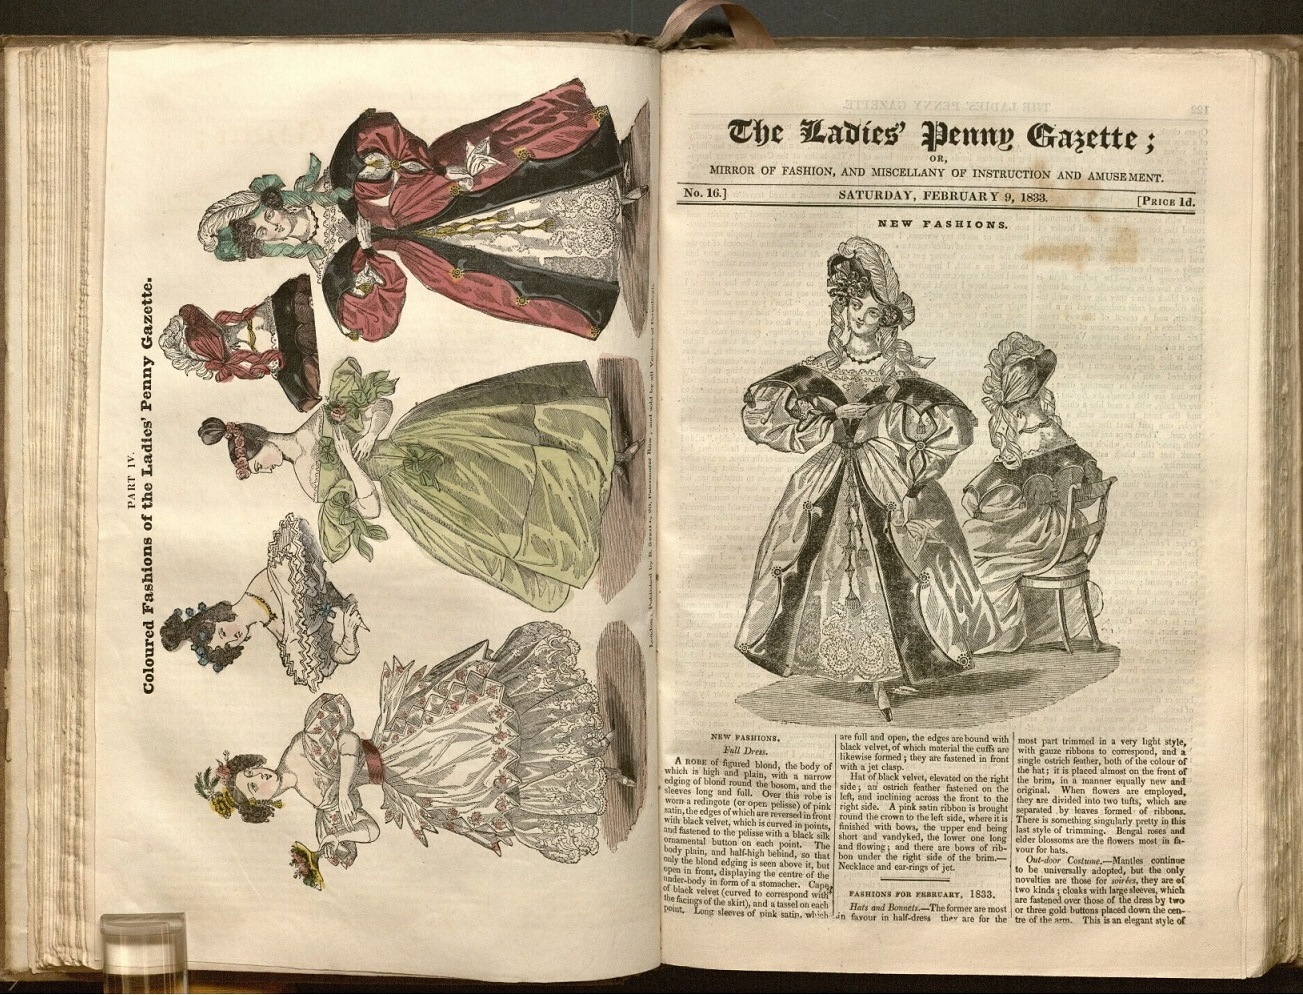 Image of coloured fashion sheet and first page of The Ladies’ Penny Gazette (1833)